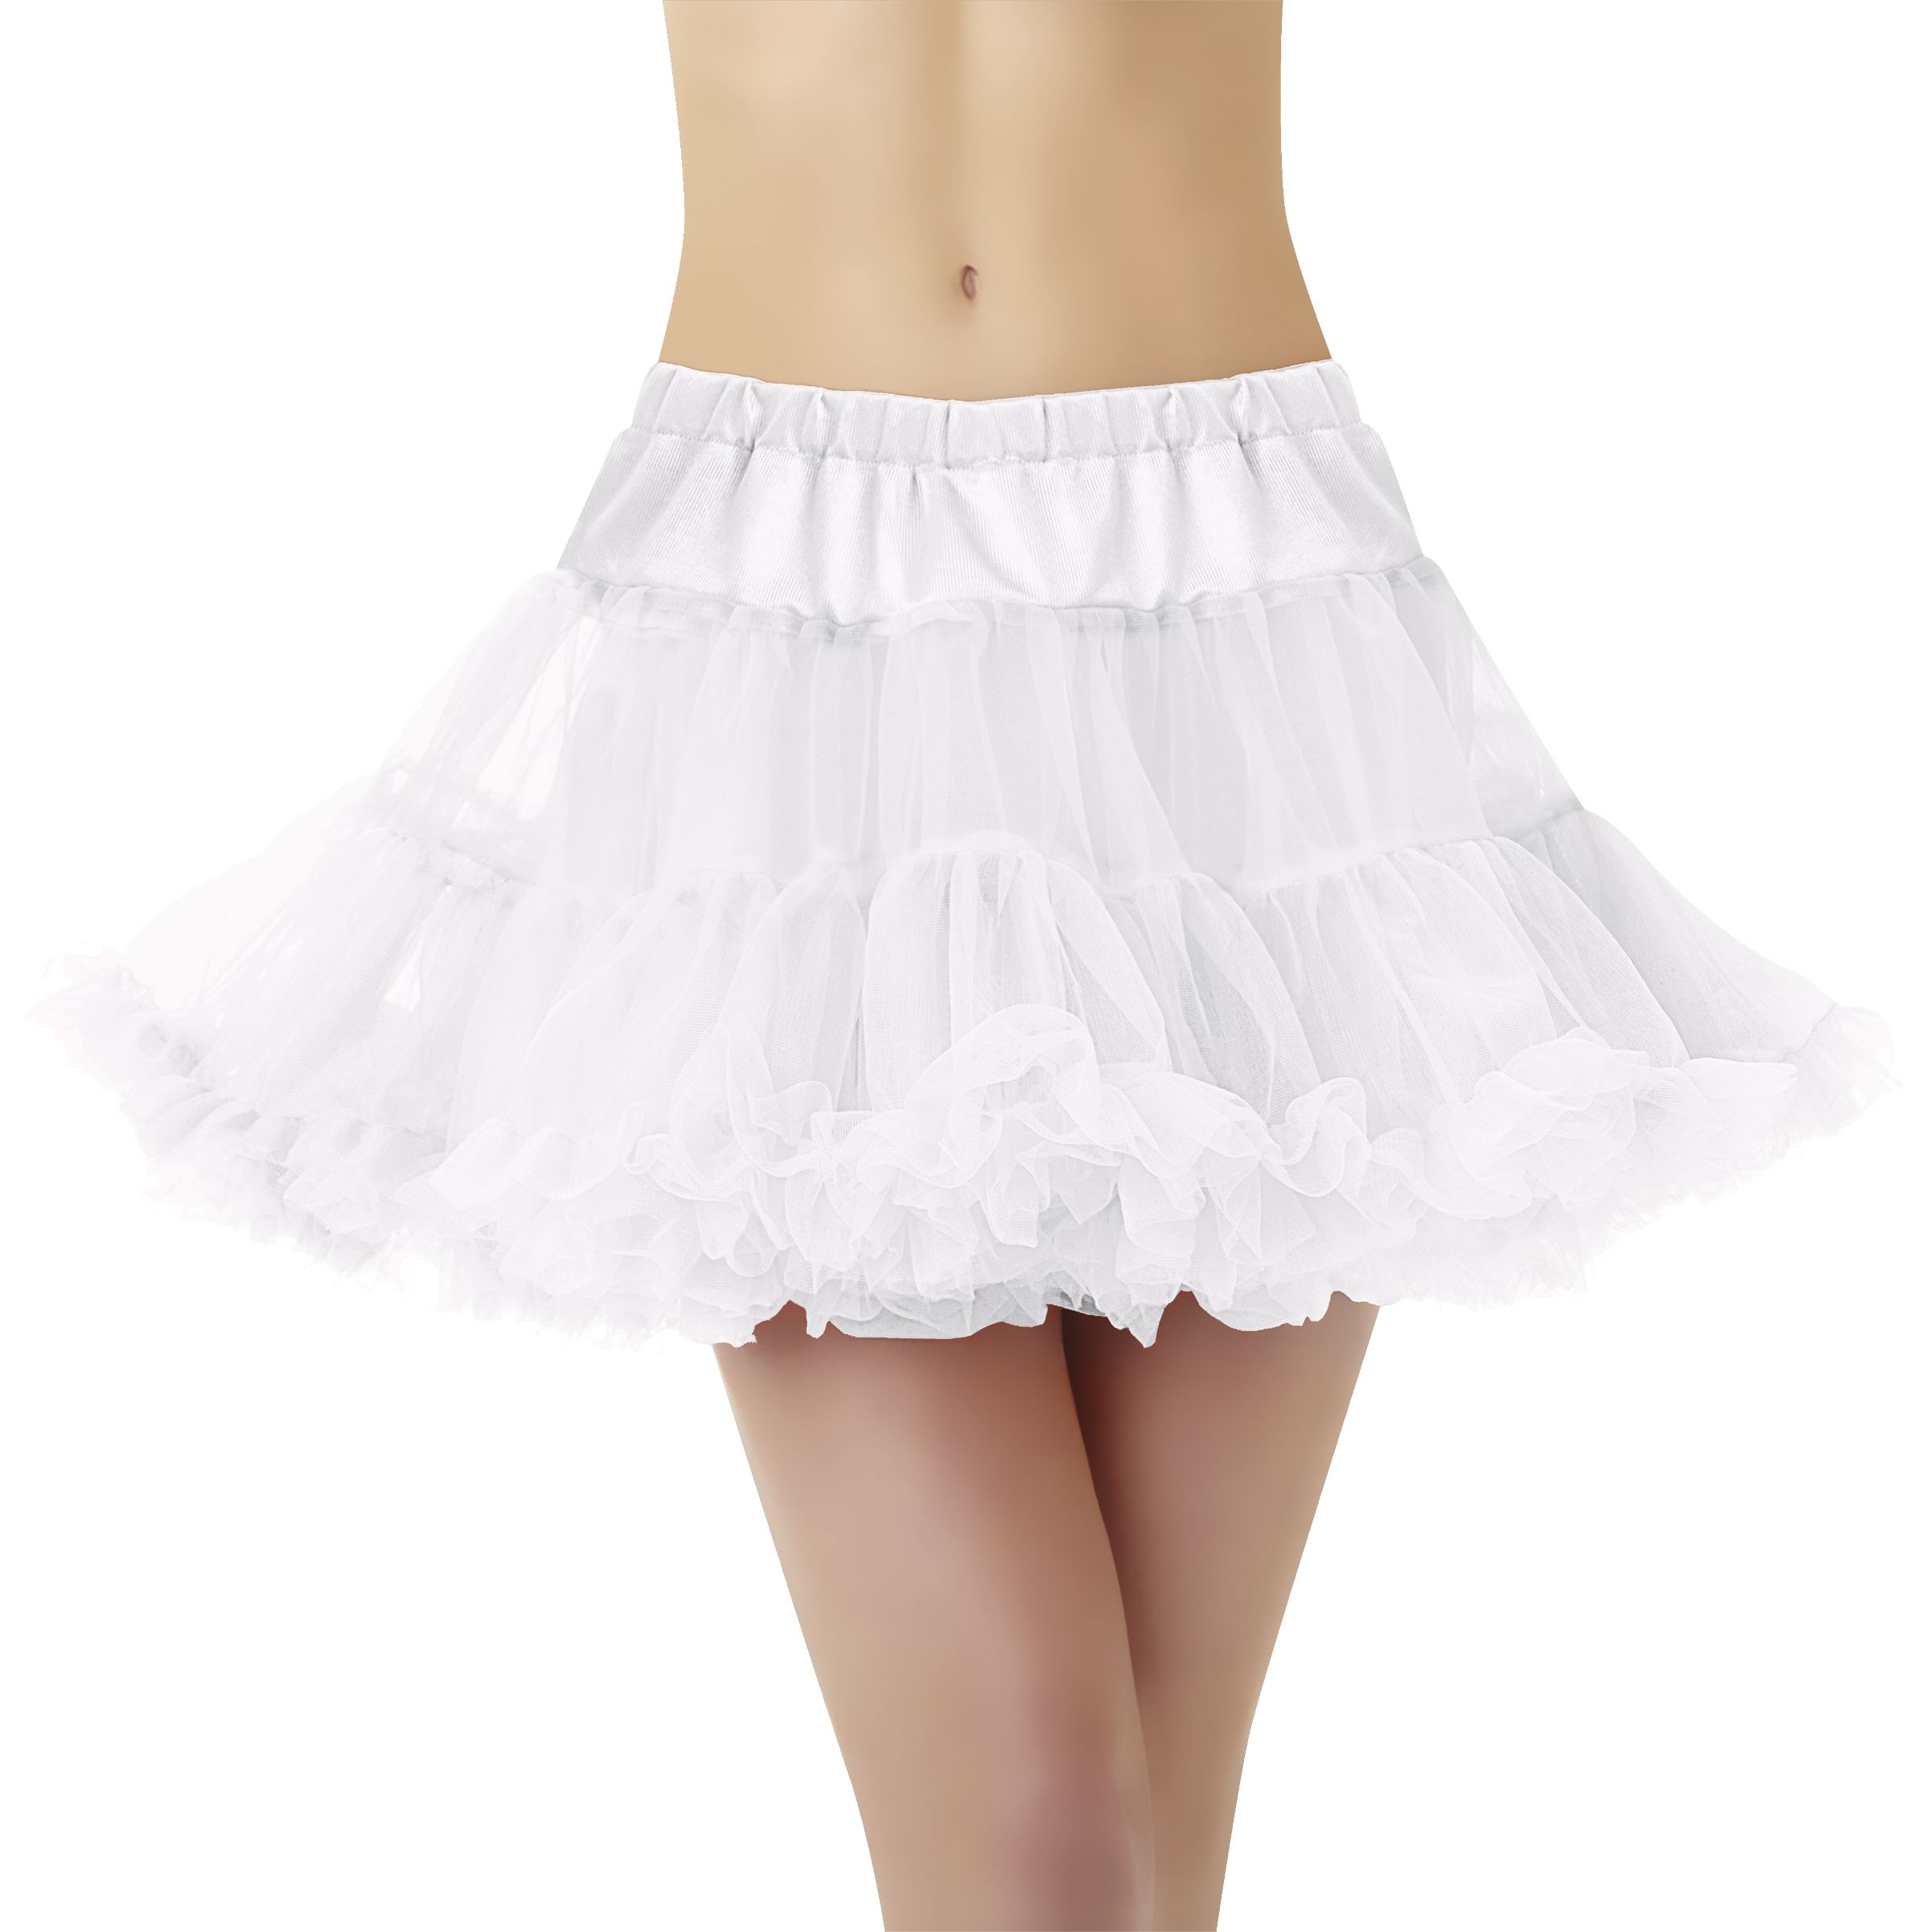 https://media-www.partycity.ca/product/seasonal-gardening/party-city-seasonal/party-city-halloween-and-fall-decor/8517356/adult-white-tulle-petticoat-04d1d5cf-6168-4e1b-afee-88f795a4a770-jpgrendition.jpg